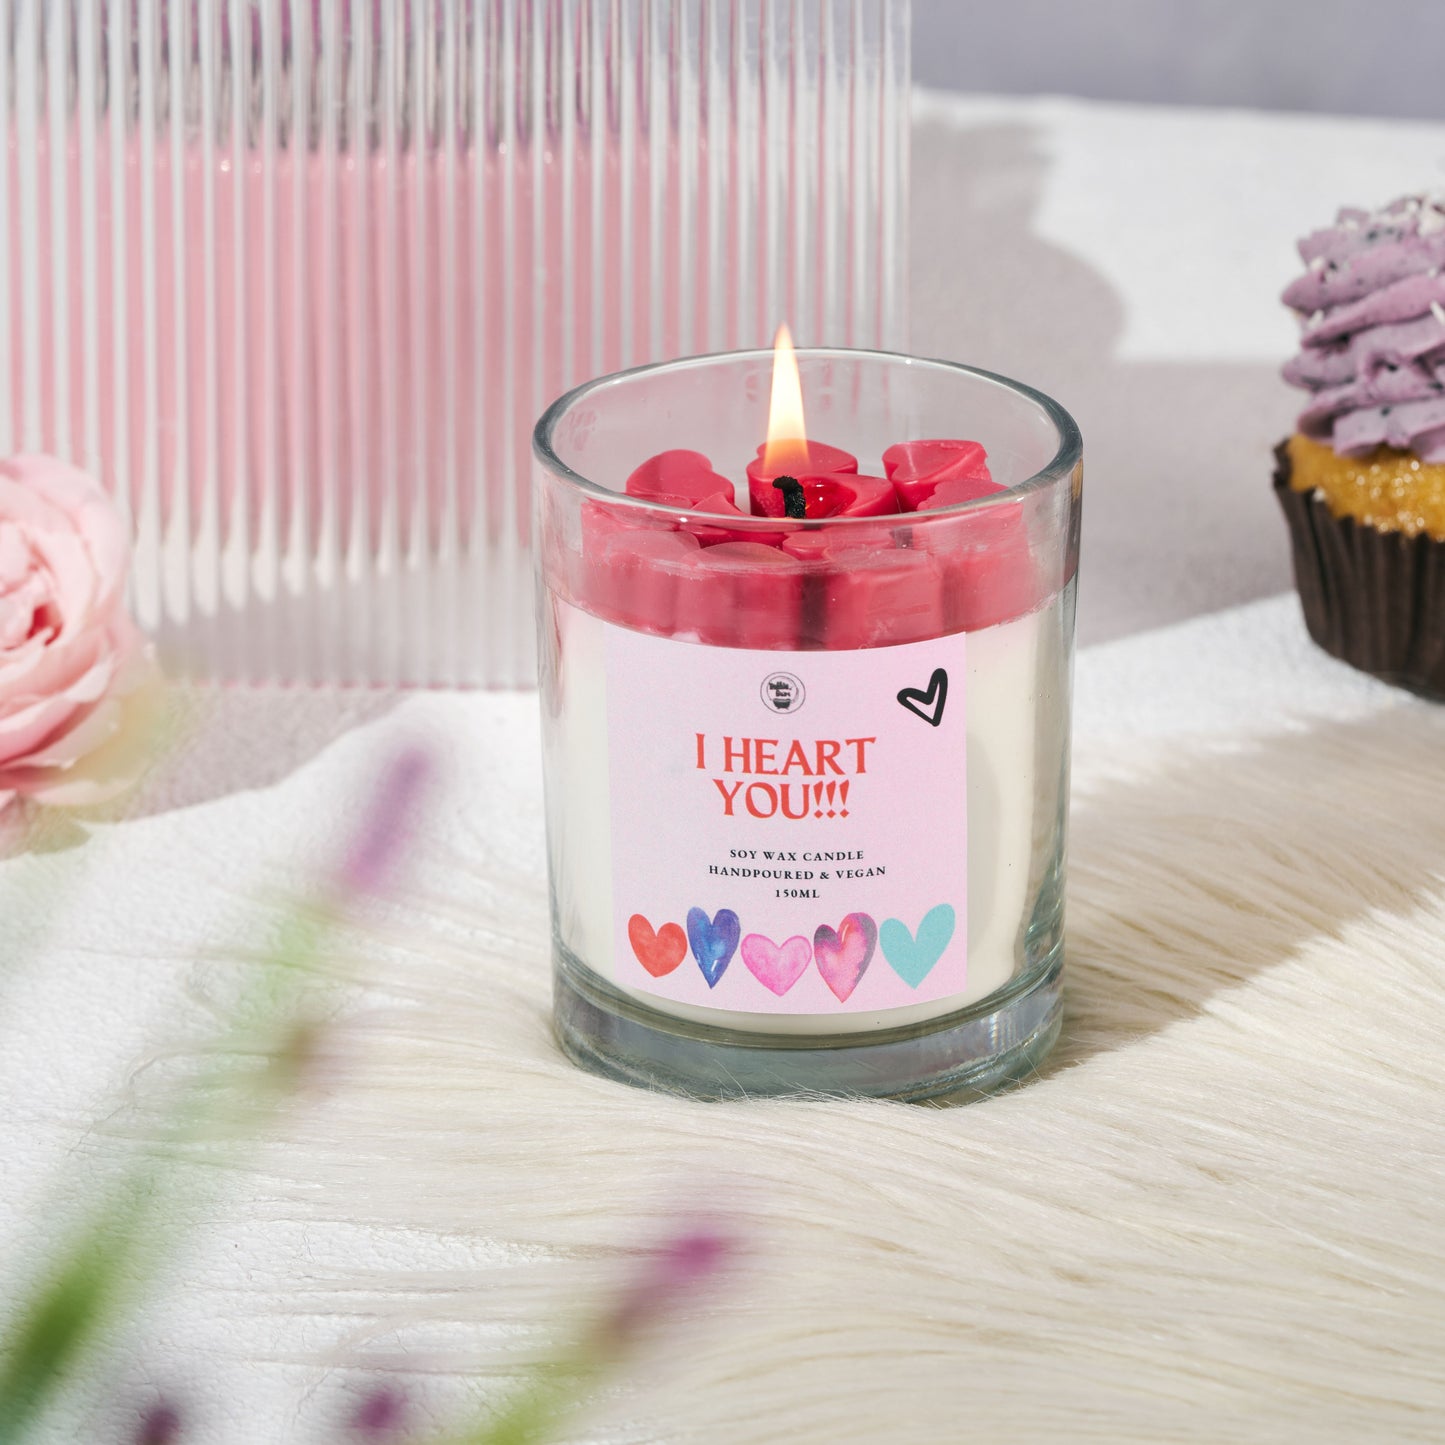 I Heart You! Soy Candle